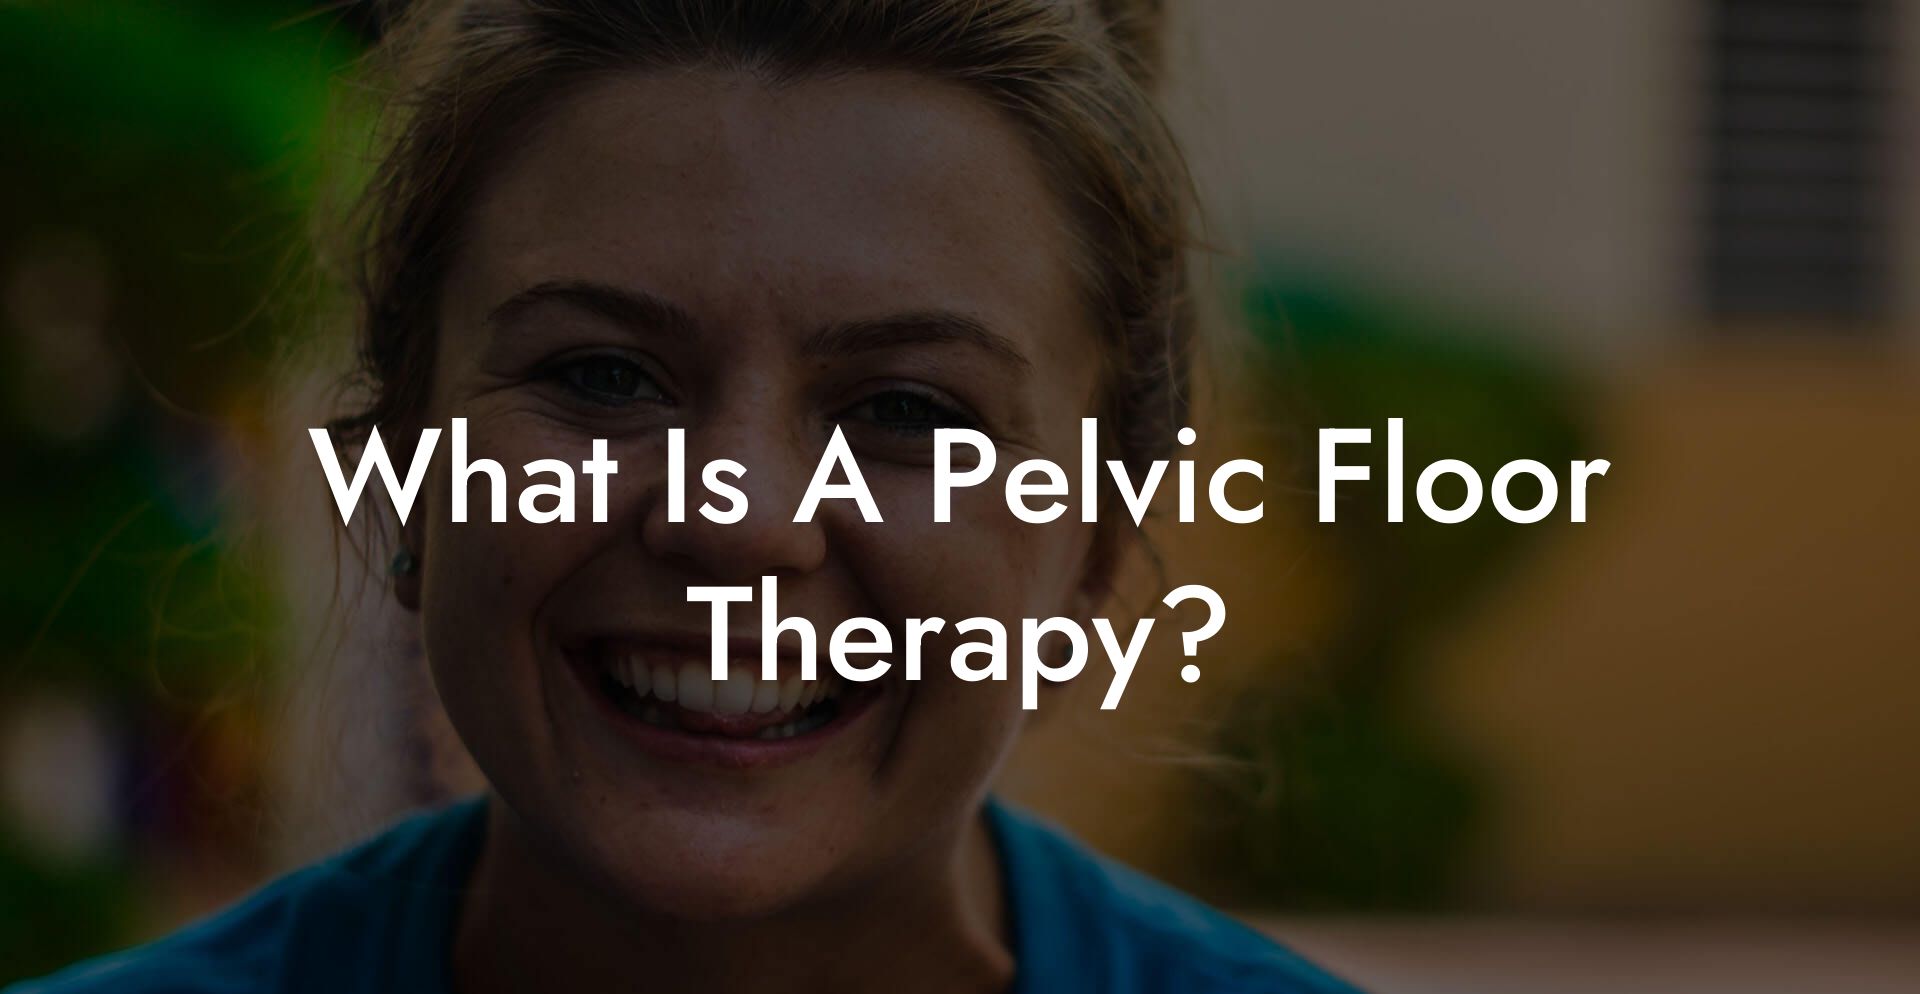 What Is A Pelvic Floor Therapy?